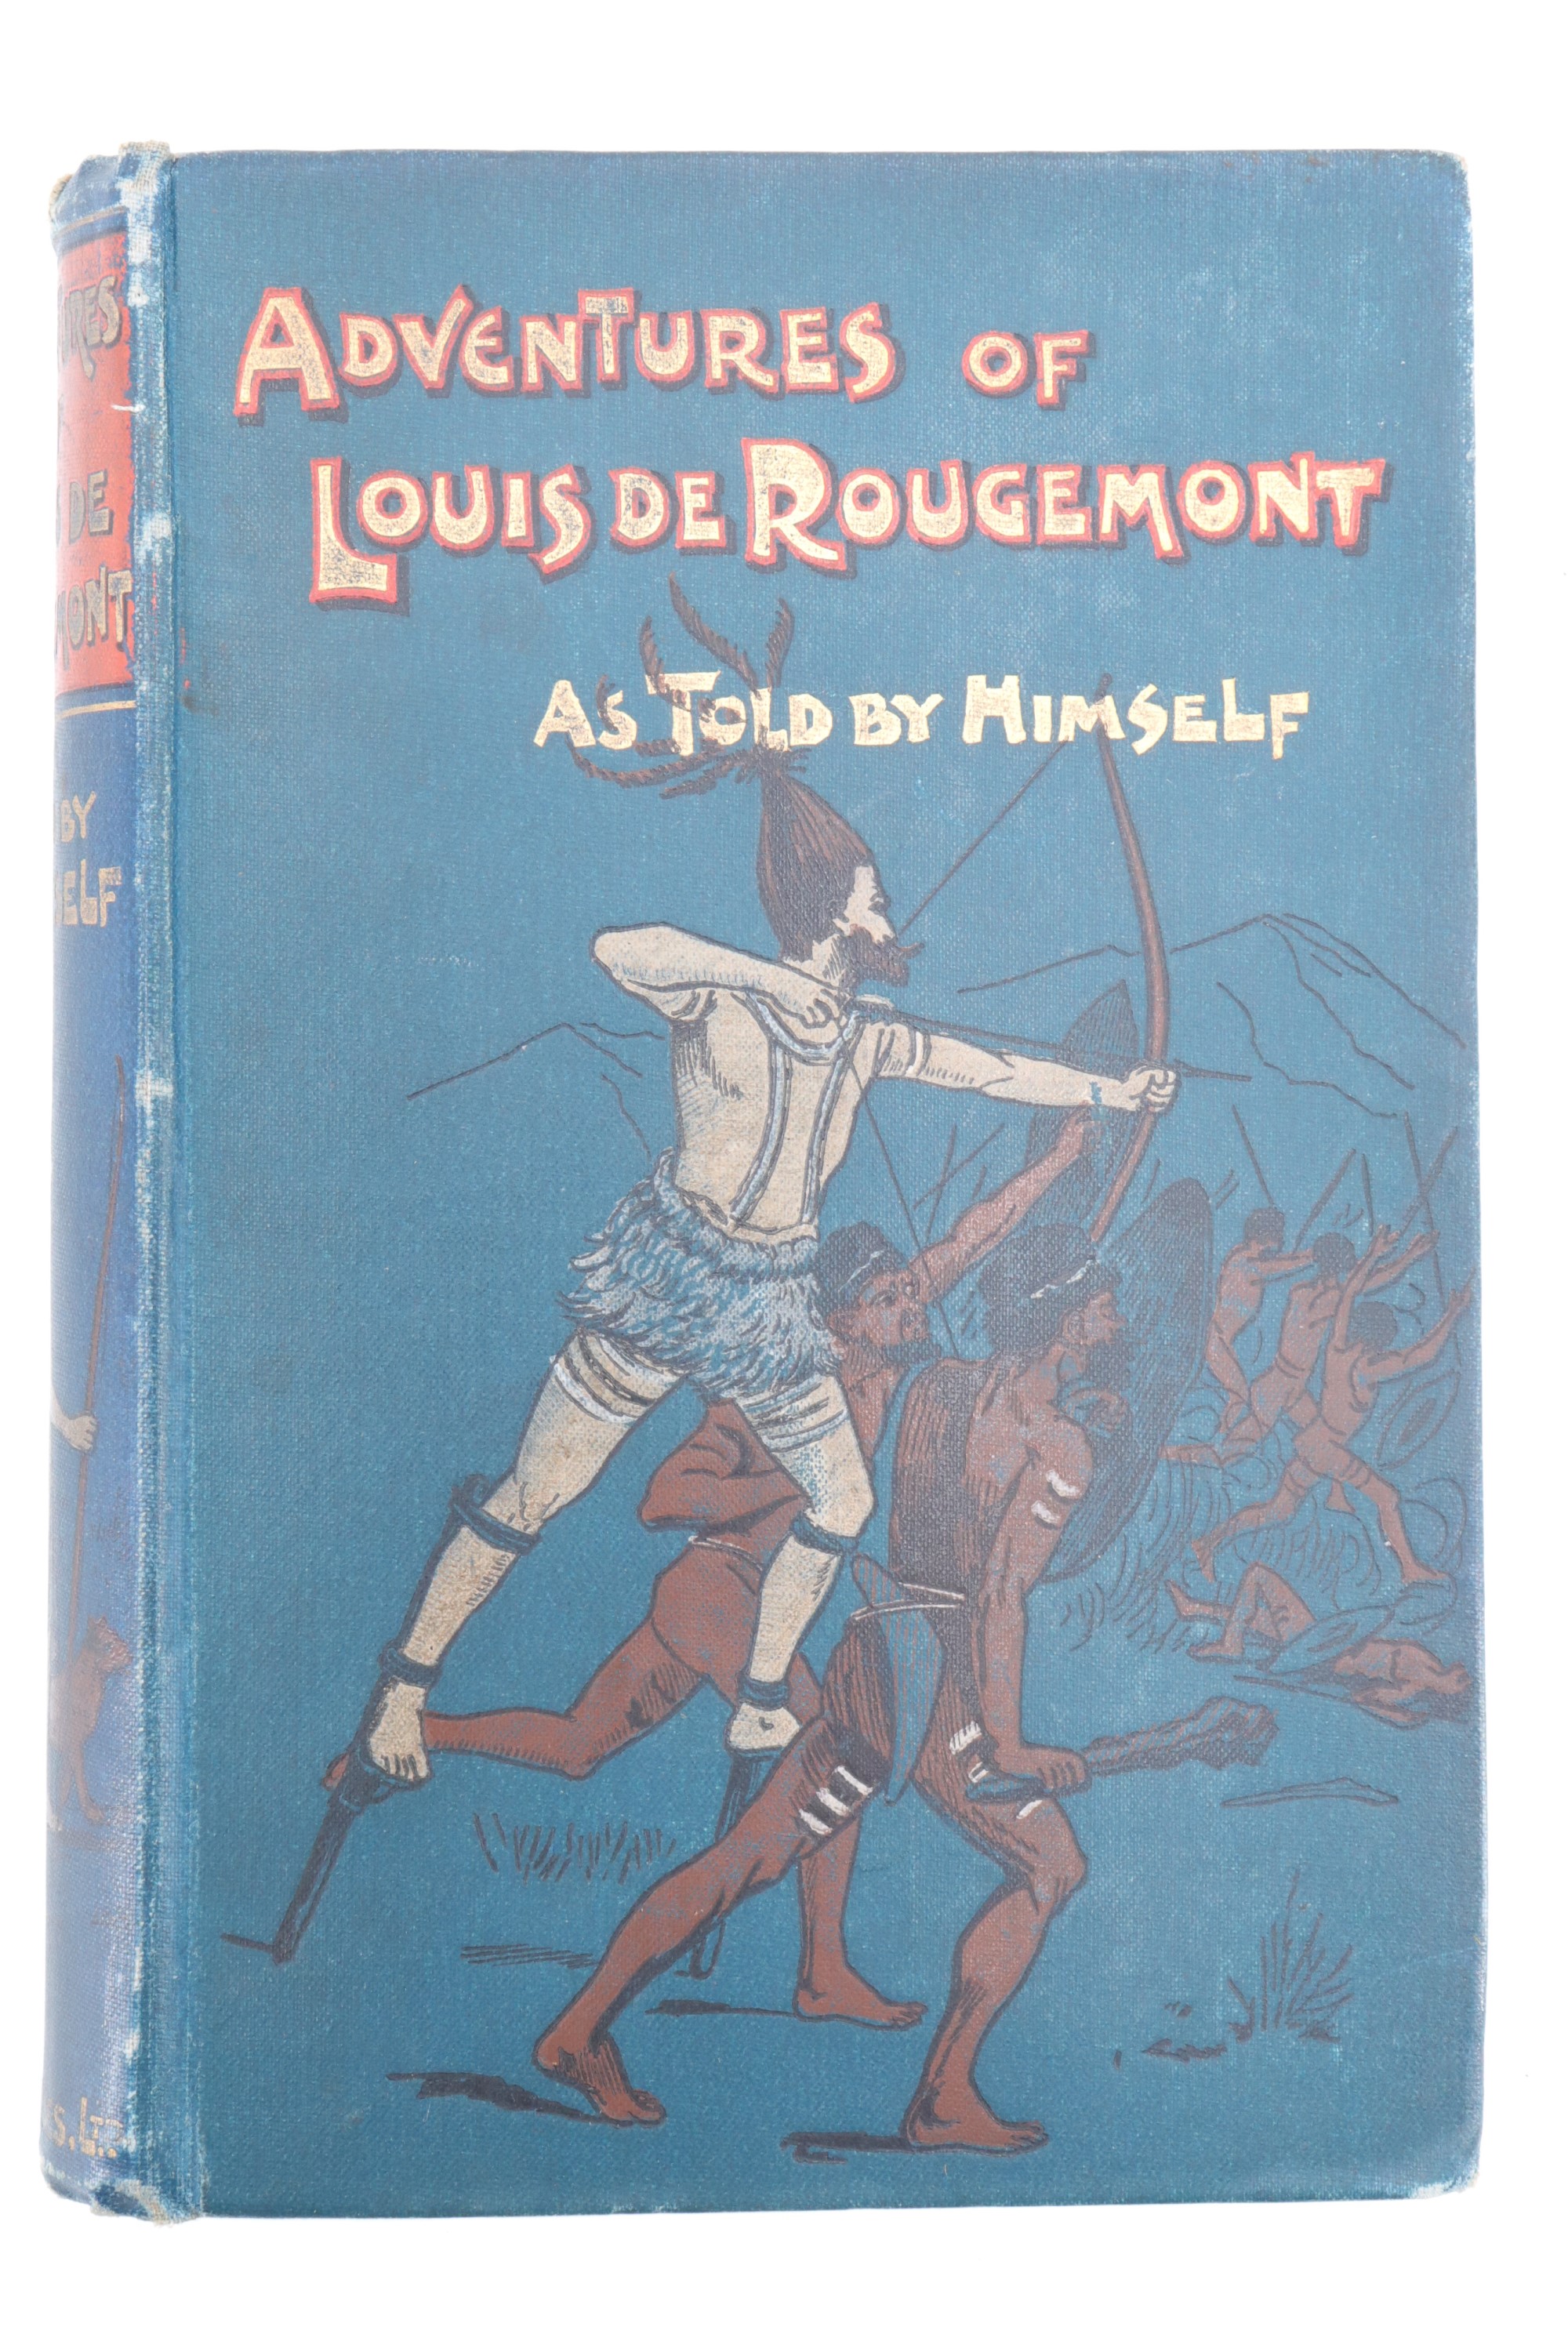 The Adventures of Louis de Rougemont. As Told by Himself, London, George Newness, 1899, 396 pp, - Image 2 of 2